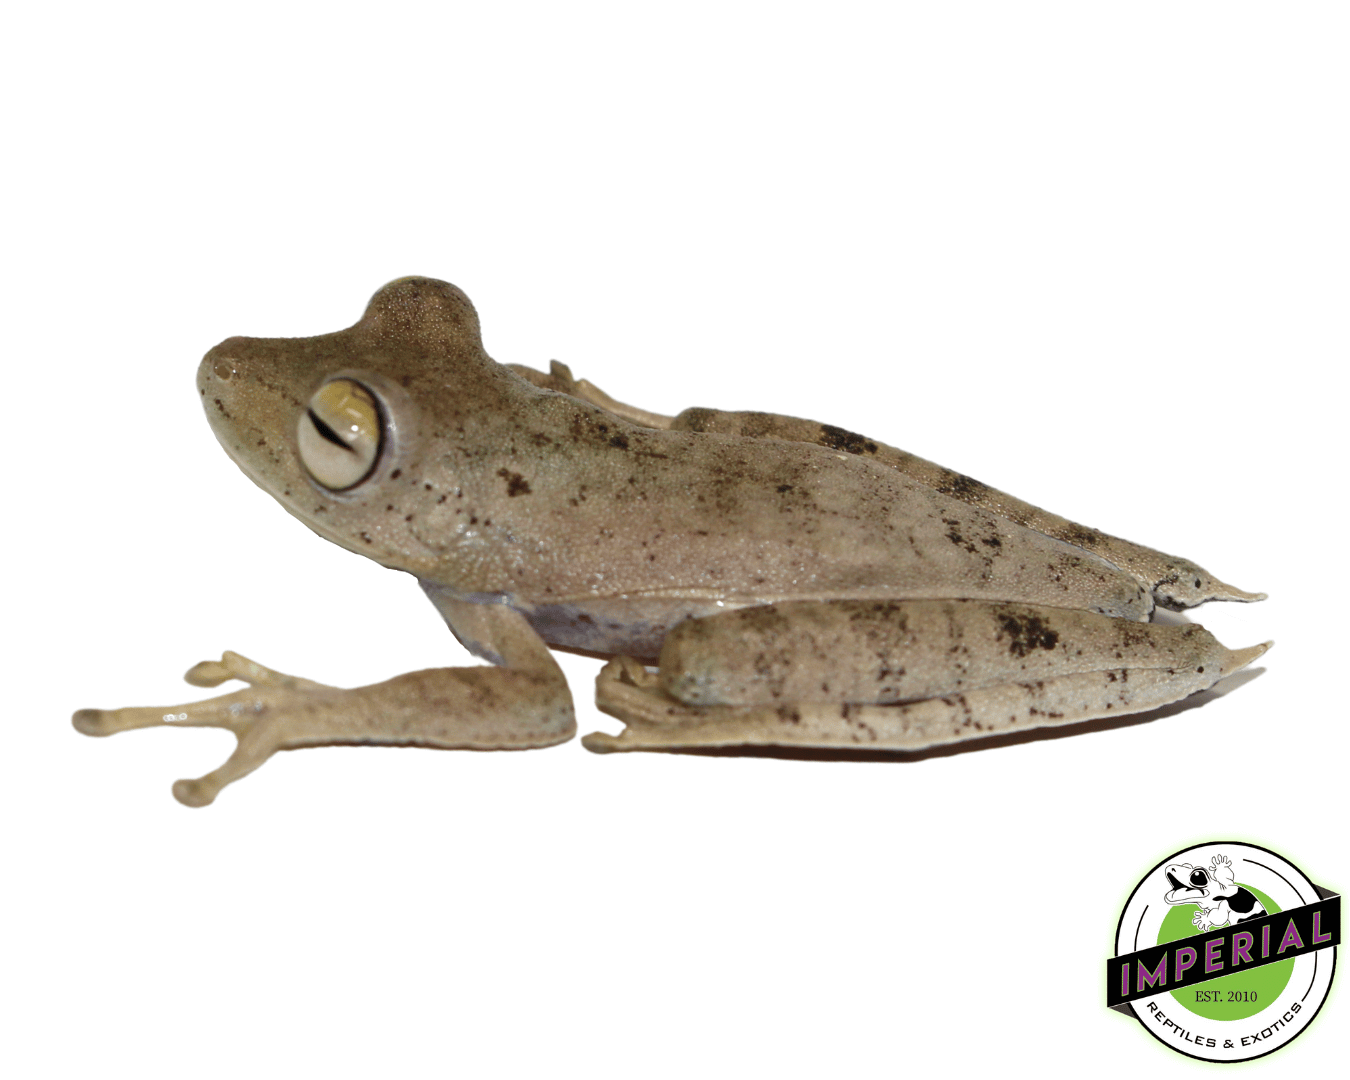 convict tree frog for sale, buy amphibians online at cheap prices